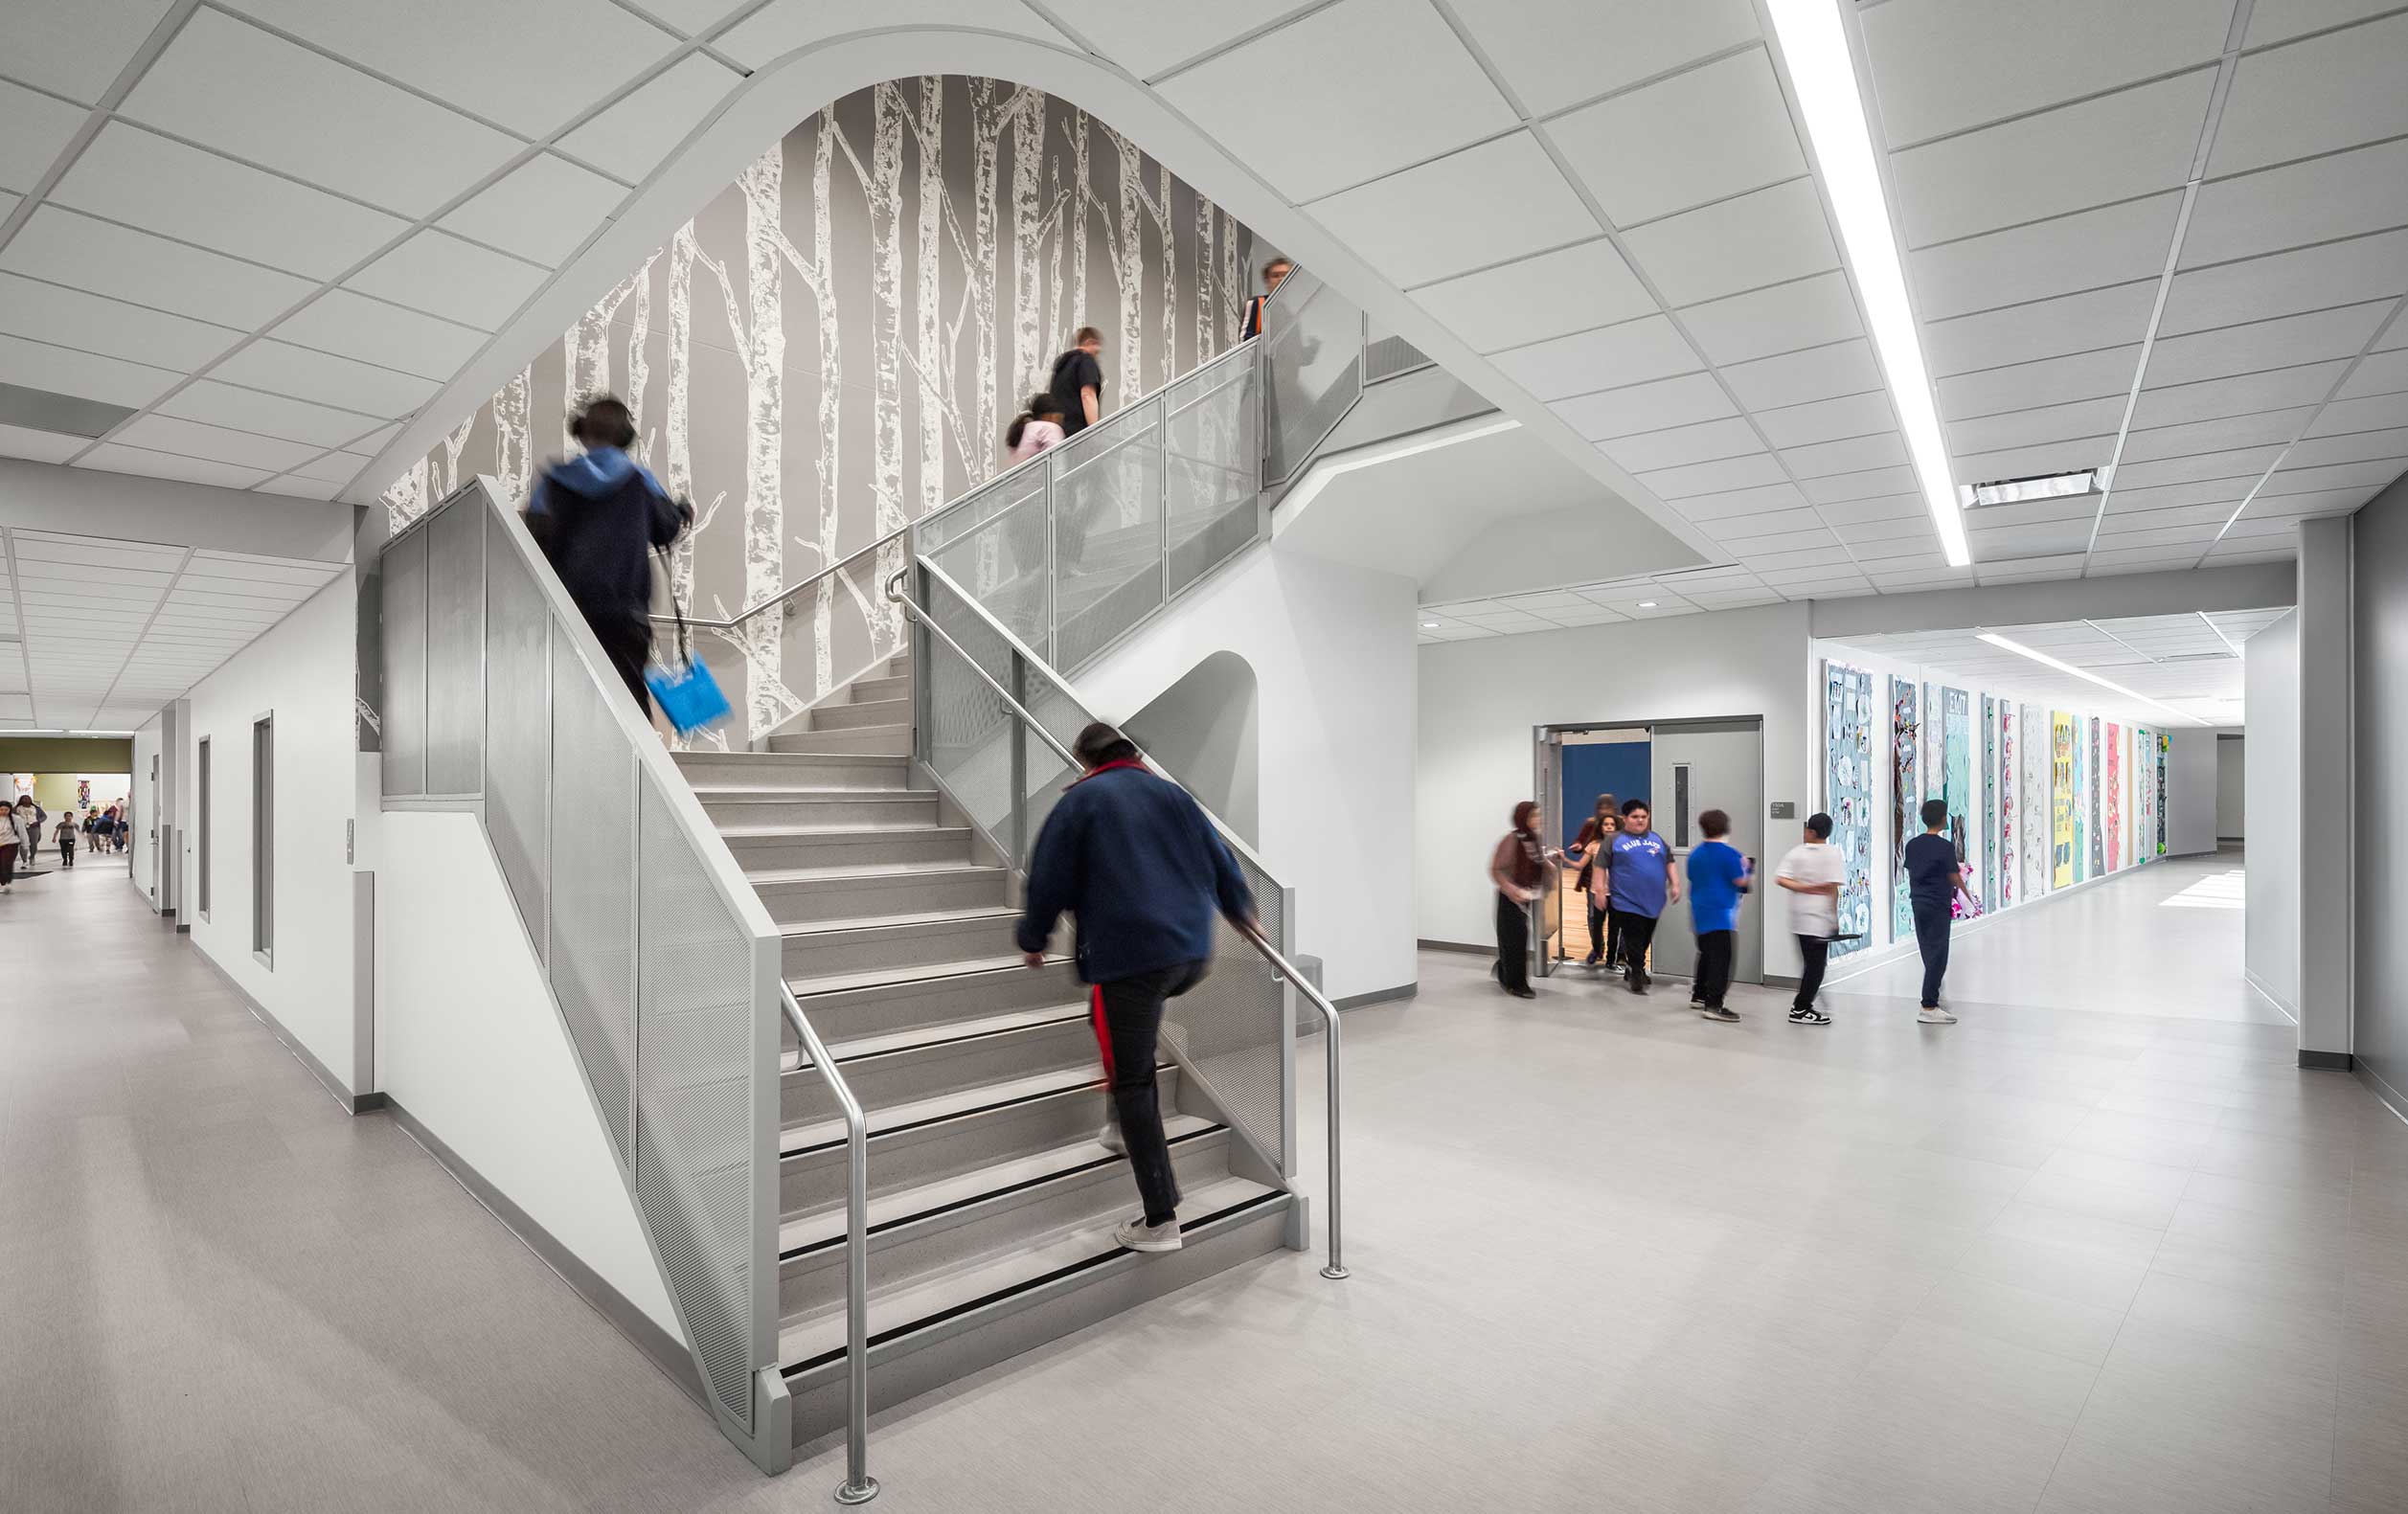 Subdued school atrium with staircase, curving ceiling, and birch tree graphic